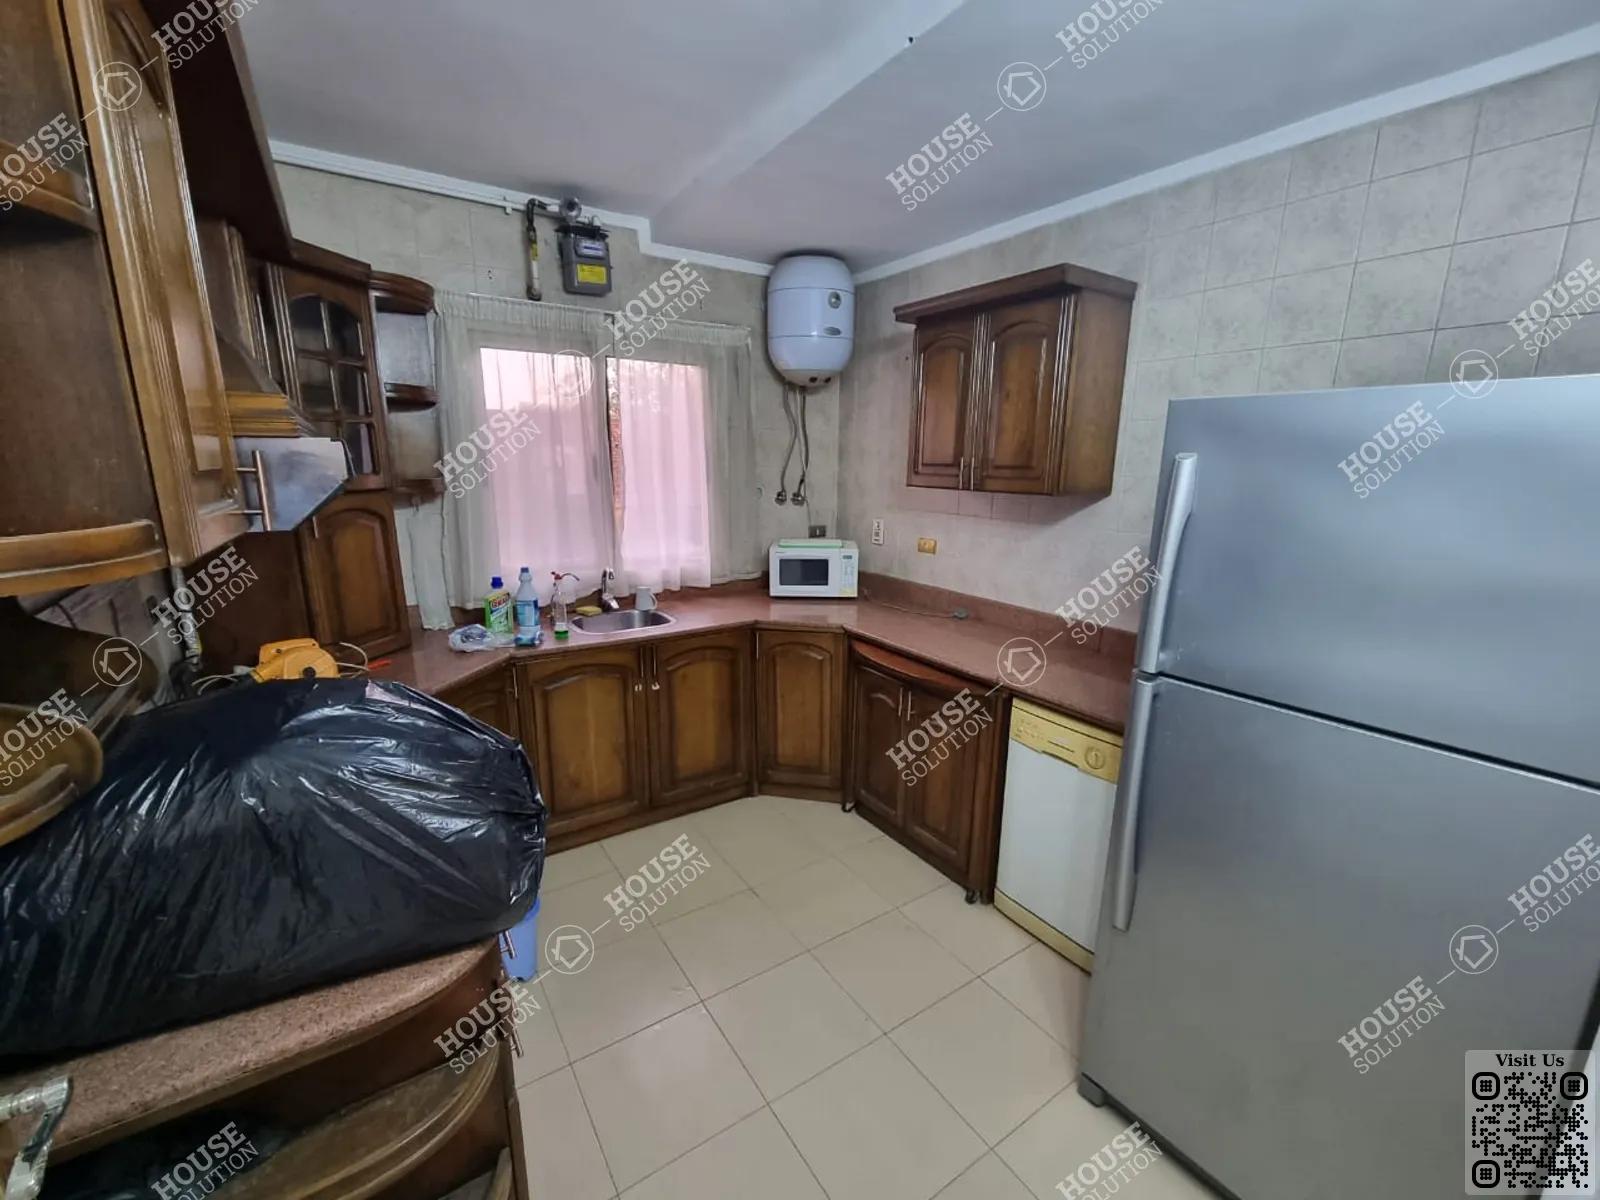 KITCHEN  @ Apartments For Rent In Maadi Maadi Sarayat Area: 170 m² consists of 3 Bedrooms 2 Bathrooms Modern furnished 5 stars #5413-1